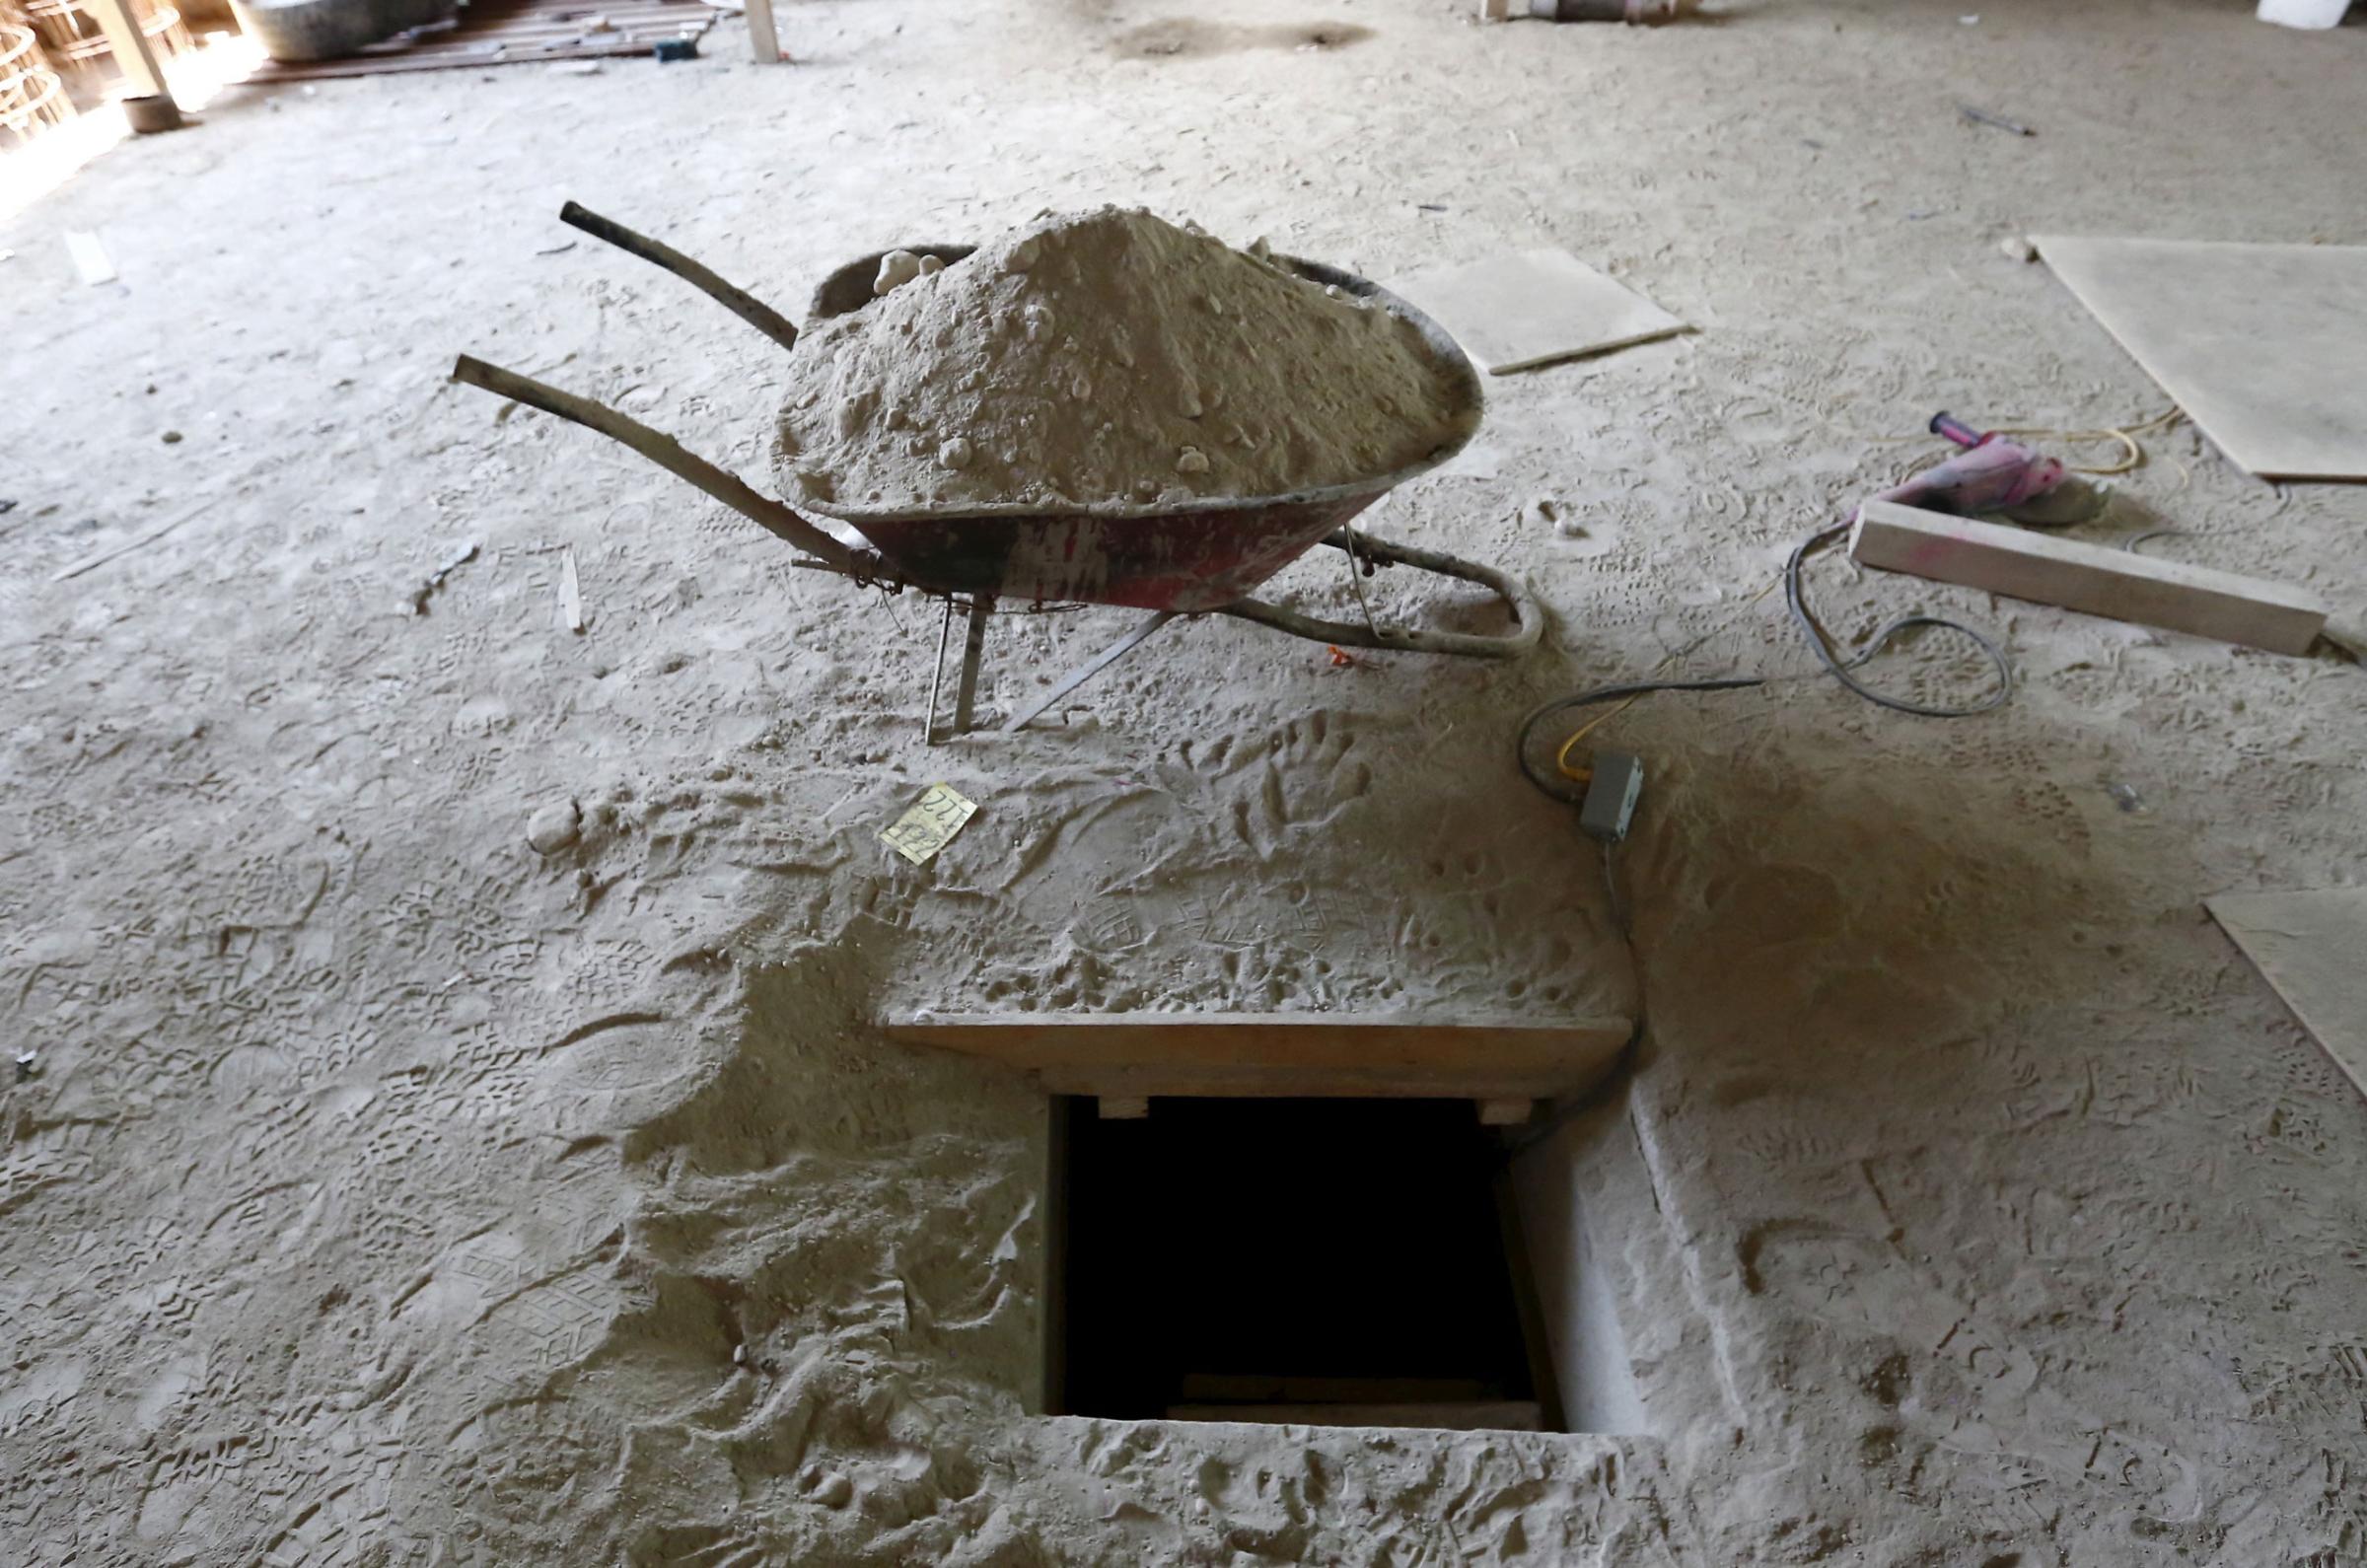 The entrance of a tunnel connected to the Altiplano Federal Penitentiary and used by drug lord Joaquin 'El Chapo' Guzman to escape, is seen in Almoloya de Juarez, on the outskirts of Mexico City, July 15, 2015. U.S. law enforcement officials met with agents of the Mexican attorney general's office this week to share information related to the escape from prison of Guzman and coordinate efforts to apprehend him, a Mexican government official said on Wednesday. REUTERS/Edgard Garrido